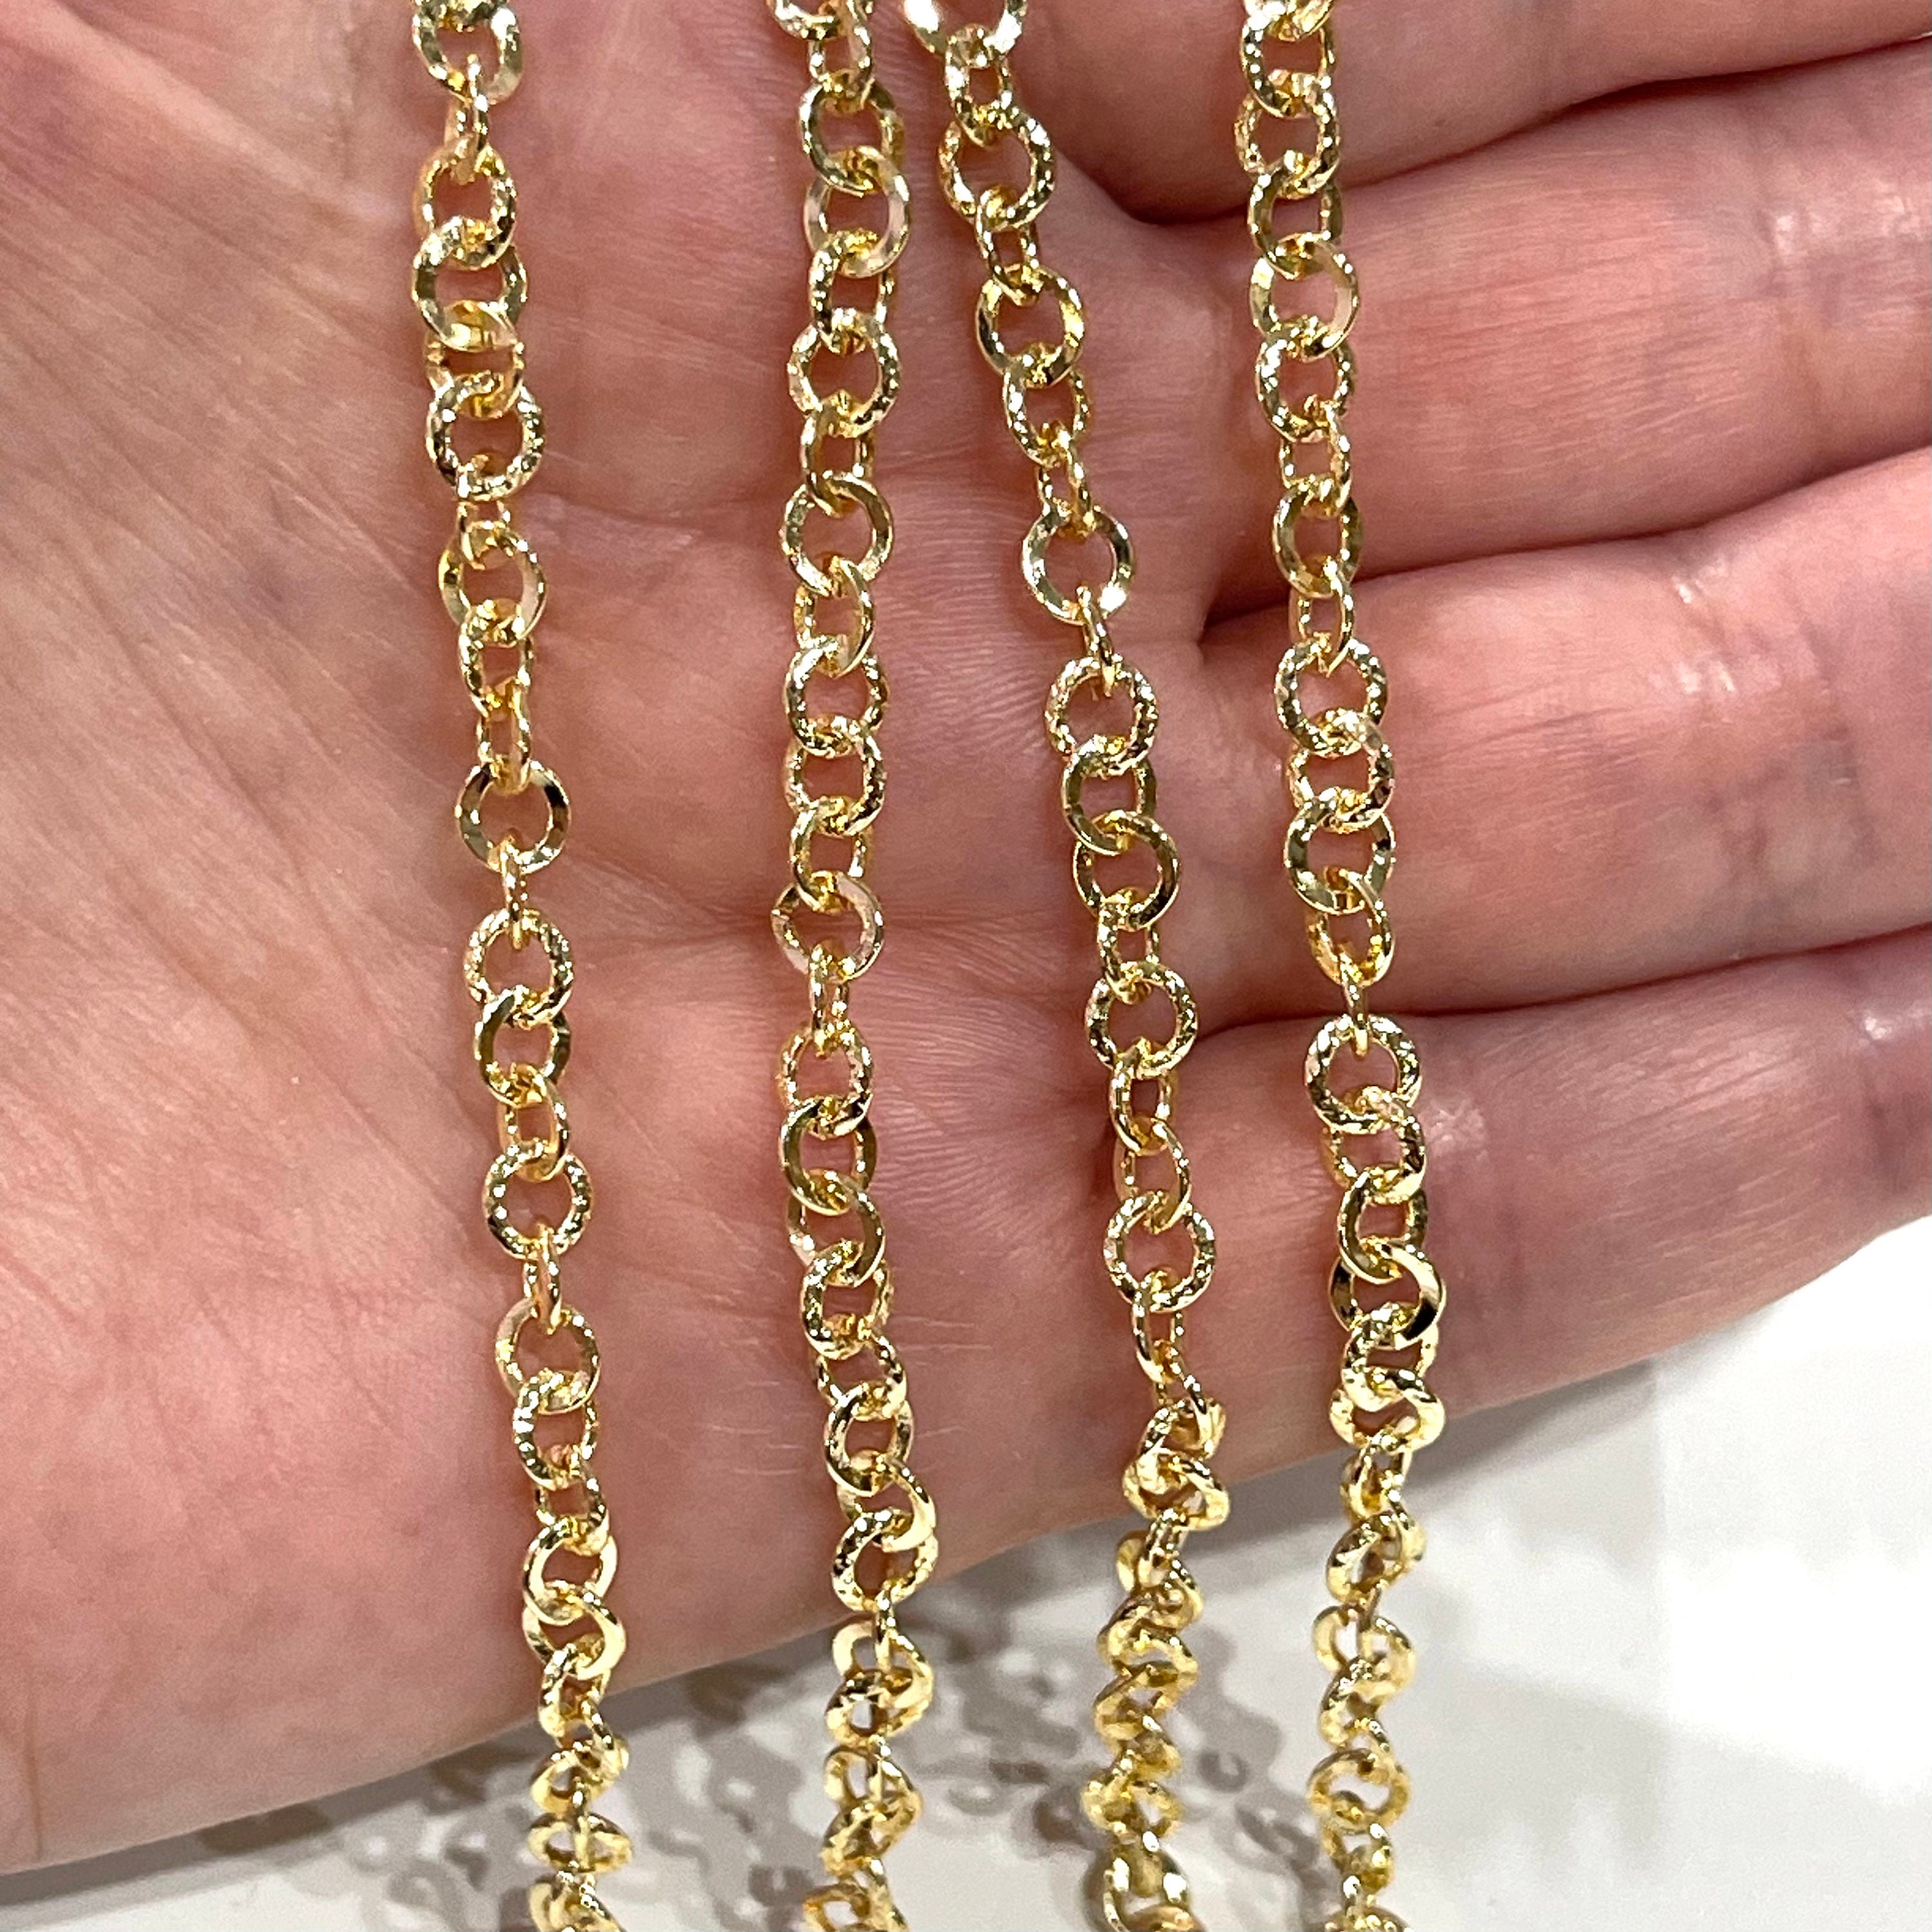 24Kt Shiny Gold Plated Chain 4.5mm Gold Plated Chain | Etsy